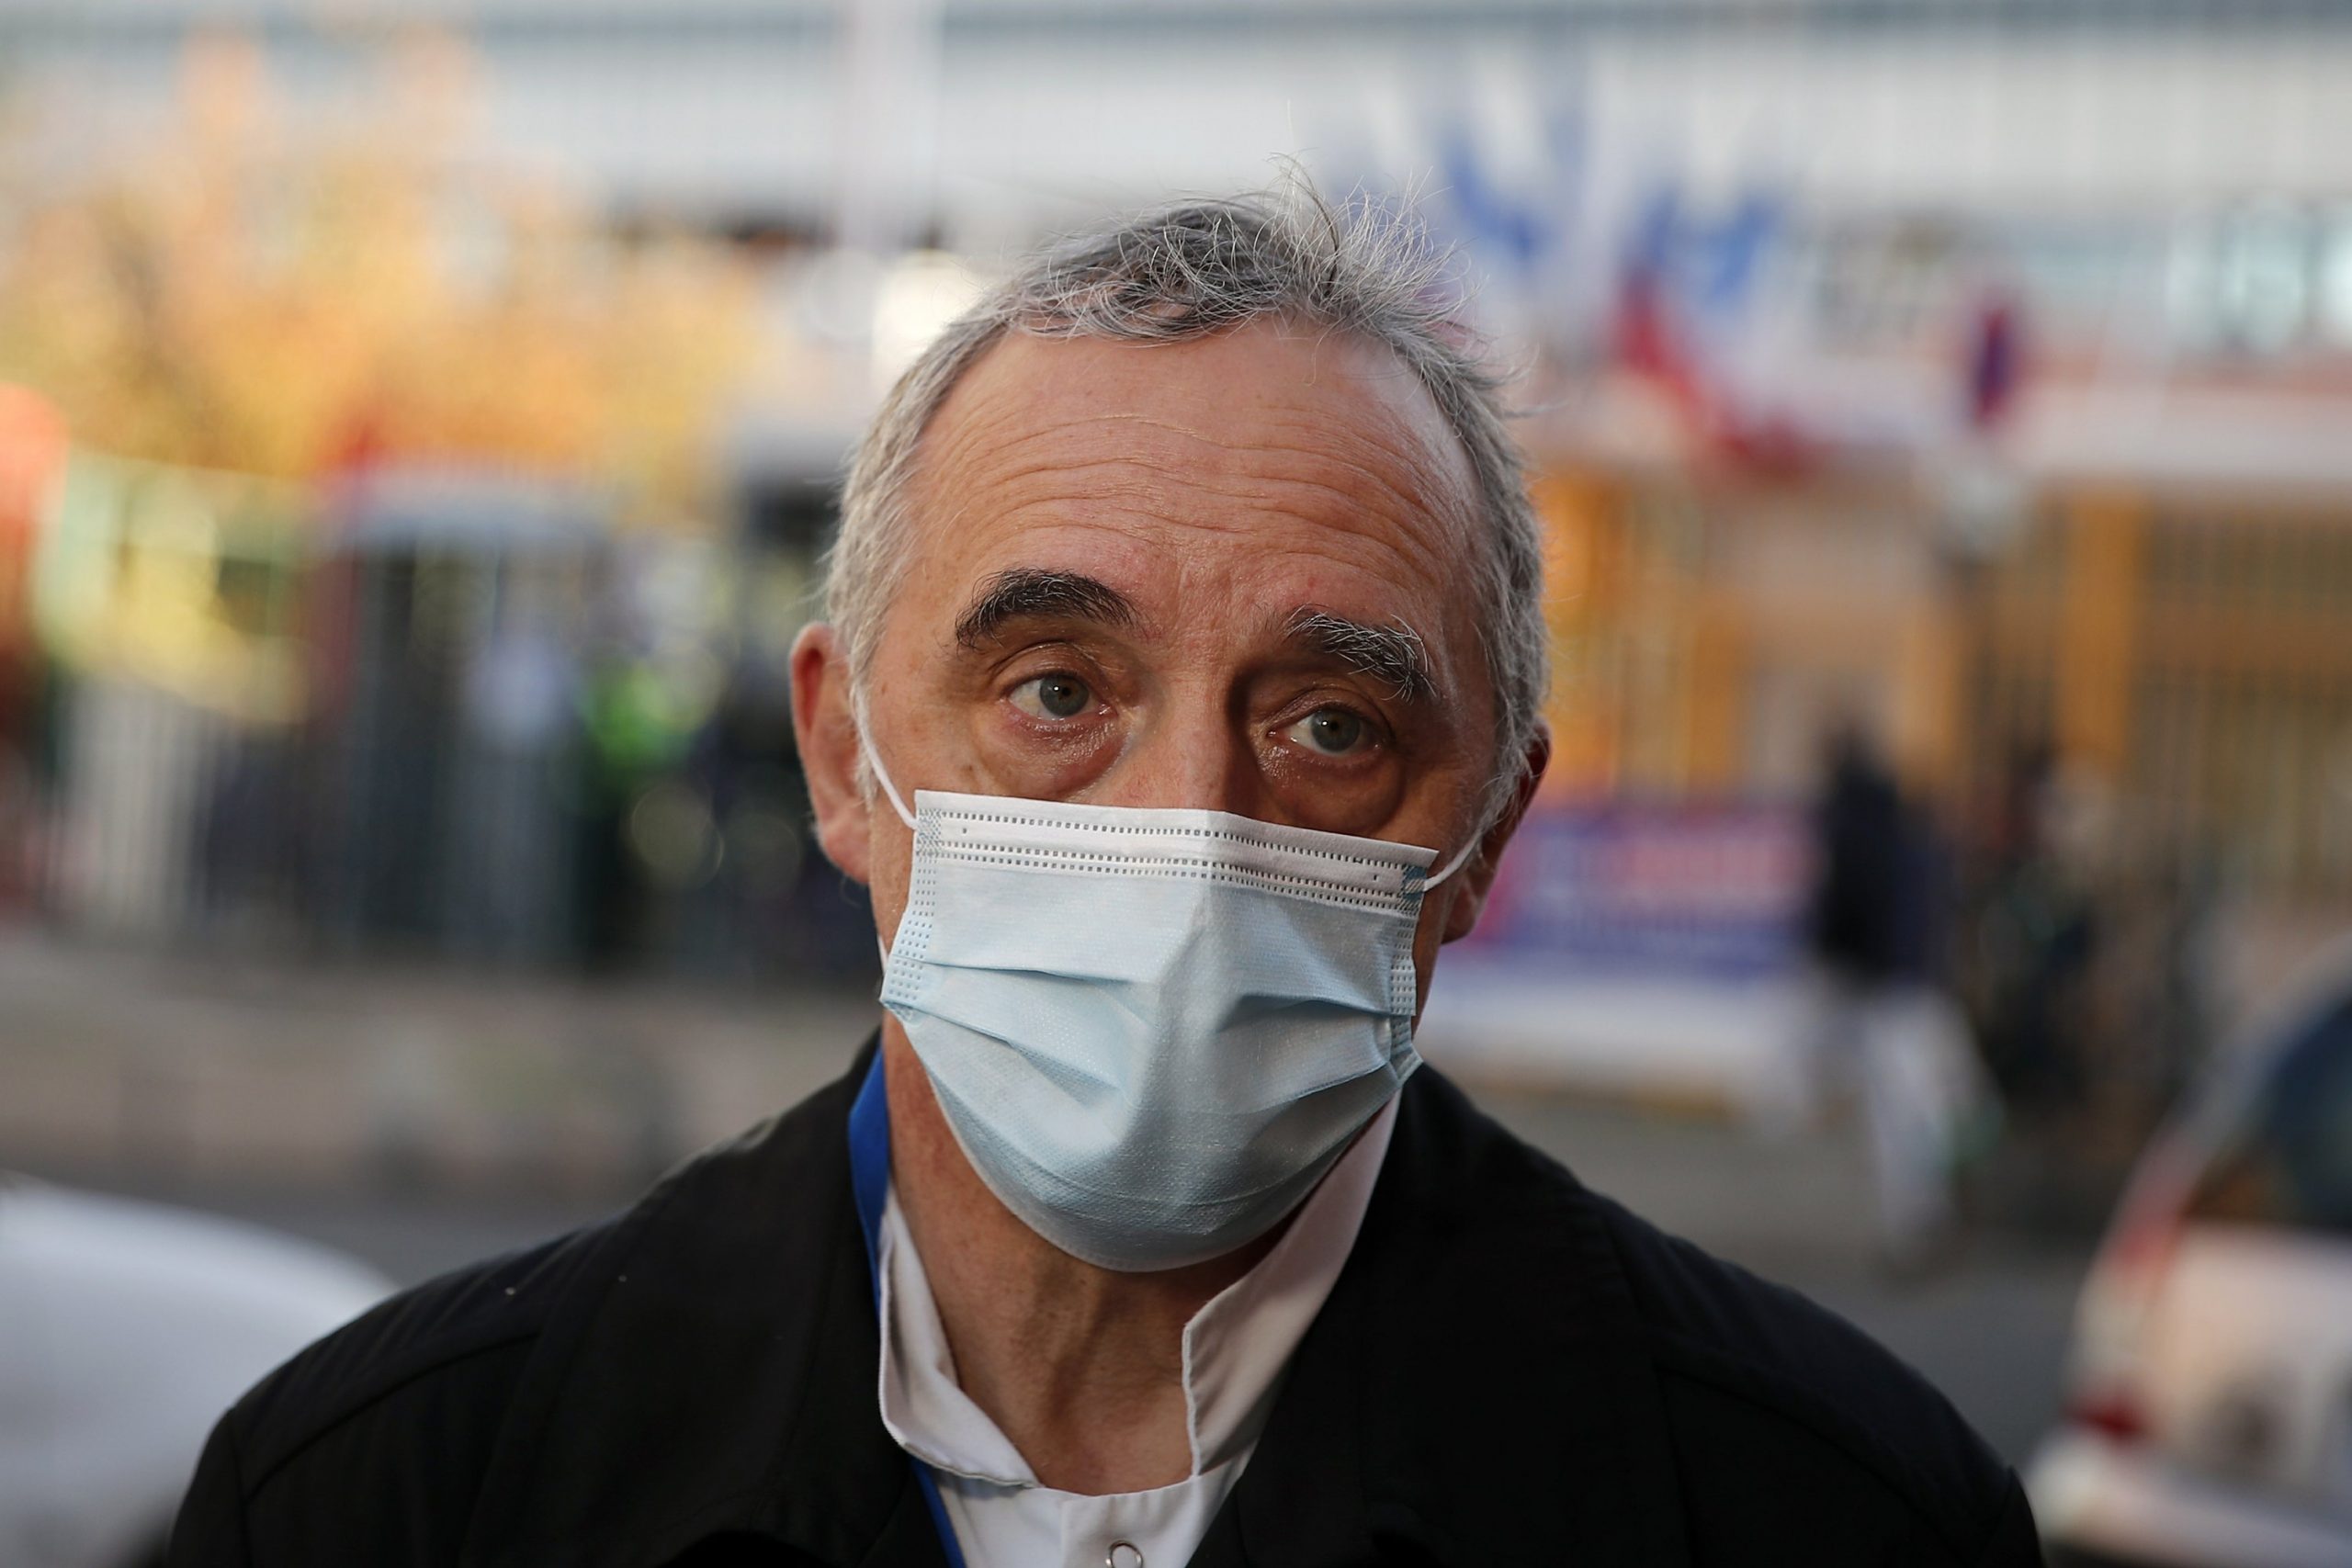 In the midst of the virus surge, Paris hospitals are beginning to see signs of optimism